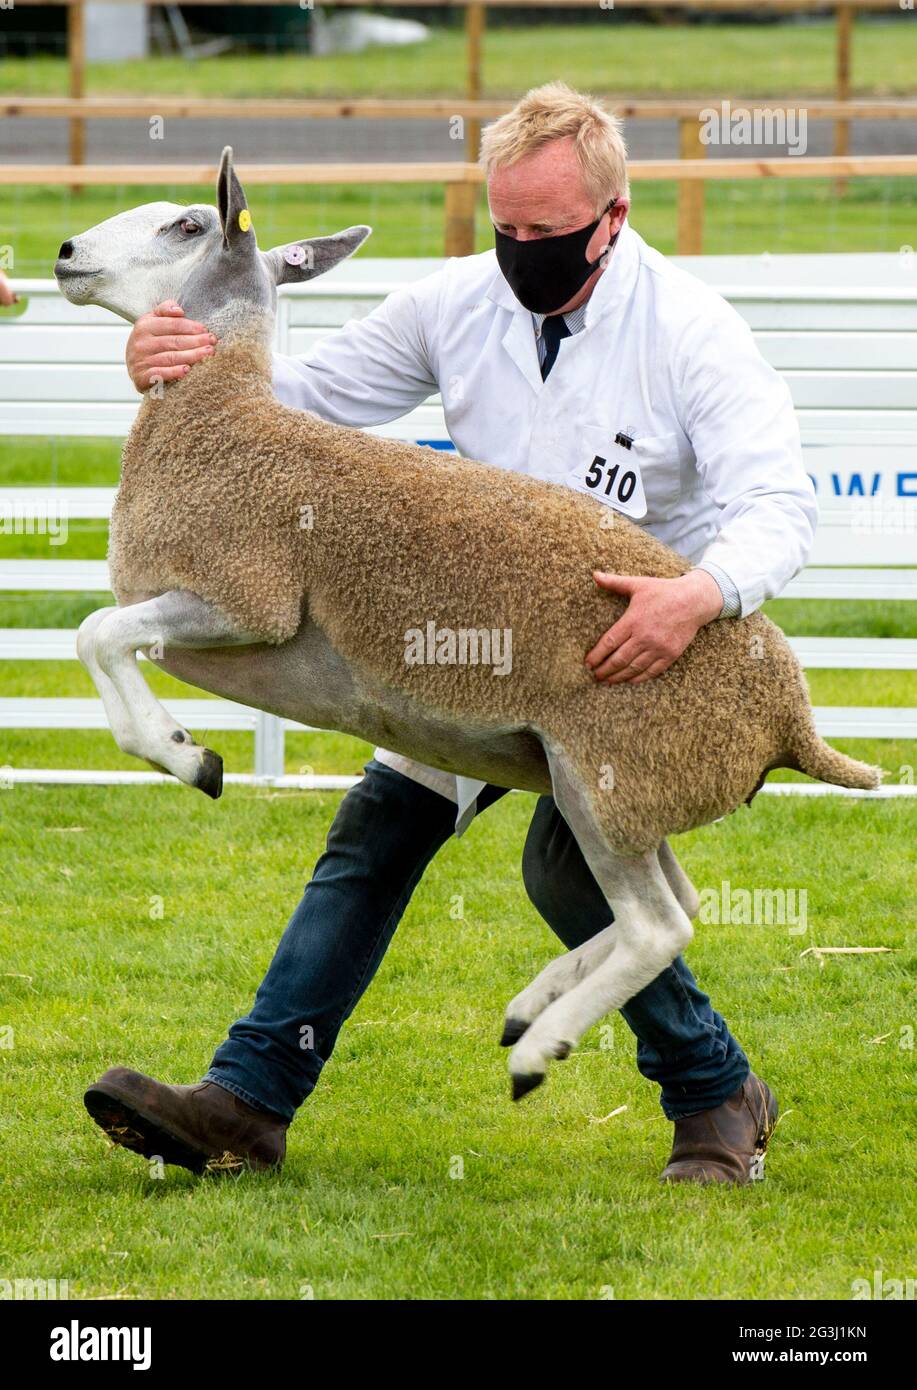 Ingliston, Edinburgh. Sheep judging at the 2021 Royal Highland Showcase agricultural show which was streamed online due to the Coronavirus Pandemic. Stock Photo